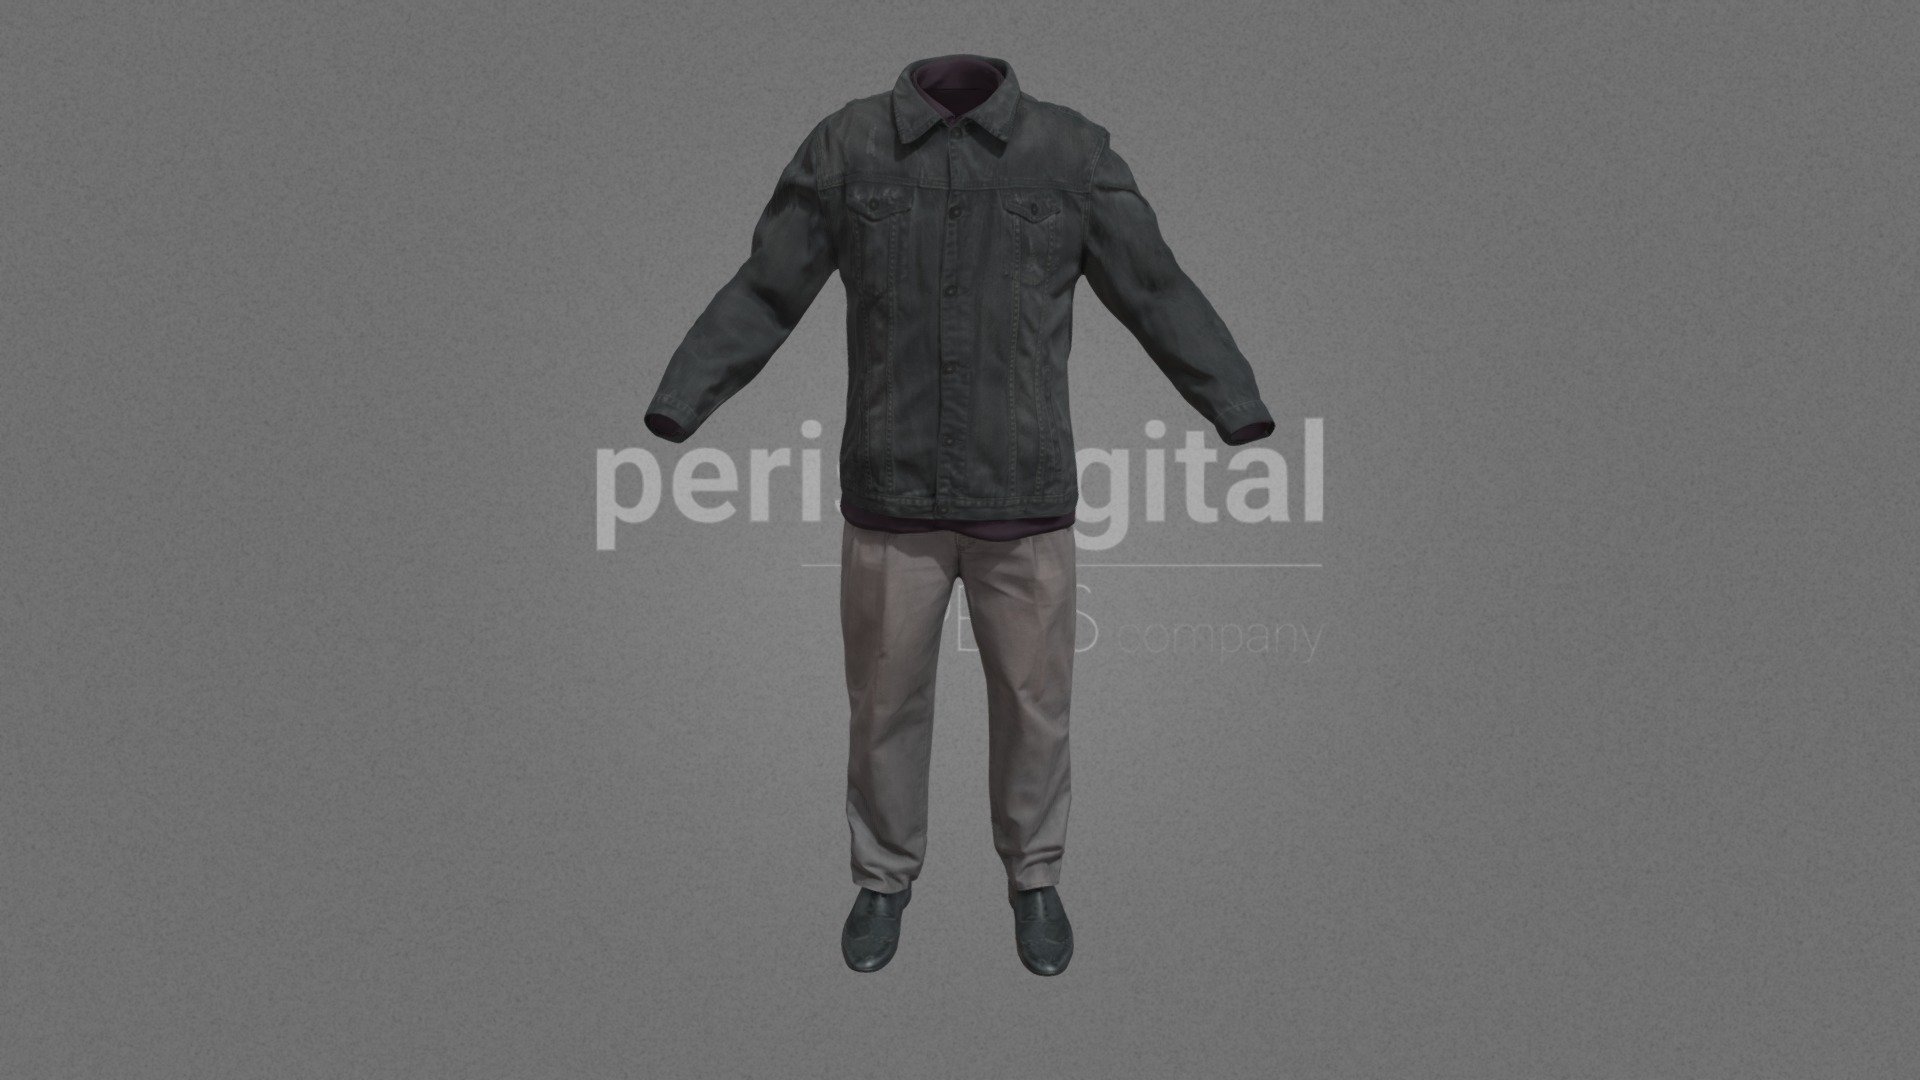 Black denim jacket, purple shirt, grey jeans trousers, black elegant shoes

PERIS DIGITAL HIGH QUALITY 3D CLOTHING They are optimized for use in medium/high poly 3D scenes and optimized for rendering. We do not include characters, but they are positioned for you to include and adjust your own character. They have a LOW Poly Mesh (LODRIG) inside the Blender file (included in the AdditionalFiles), which you can use for vertex weighting or cloth simulation and thus, make the transfer of vertices or property masks from the LOW to the HIGH model. We have included in Additional Files, the texture maps in high resolution, as well as the Displacement maps in high resolution too, so you can perform extreme point of view with your 3D cameras. With the Blender file (included in AdditionalFiles) you will be able to edit any aspect of the set . Enjoy it!

Web: https://peris.digital/ - 80s Fashion Series - Man 30 - 3D model by Peris Digital (@perisdigital) 3d model